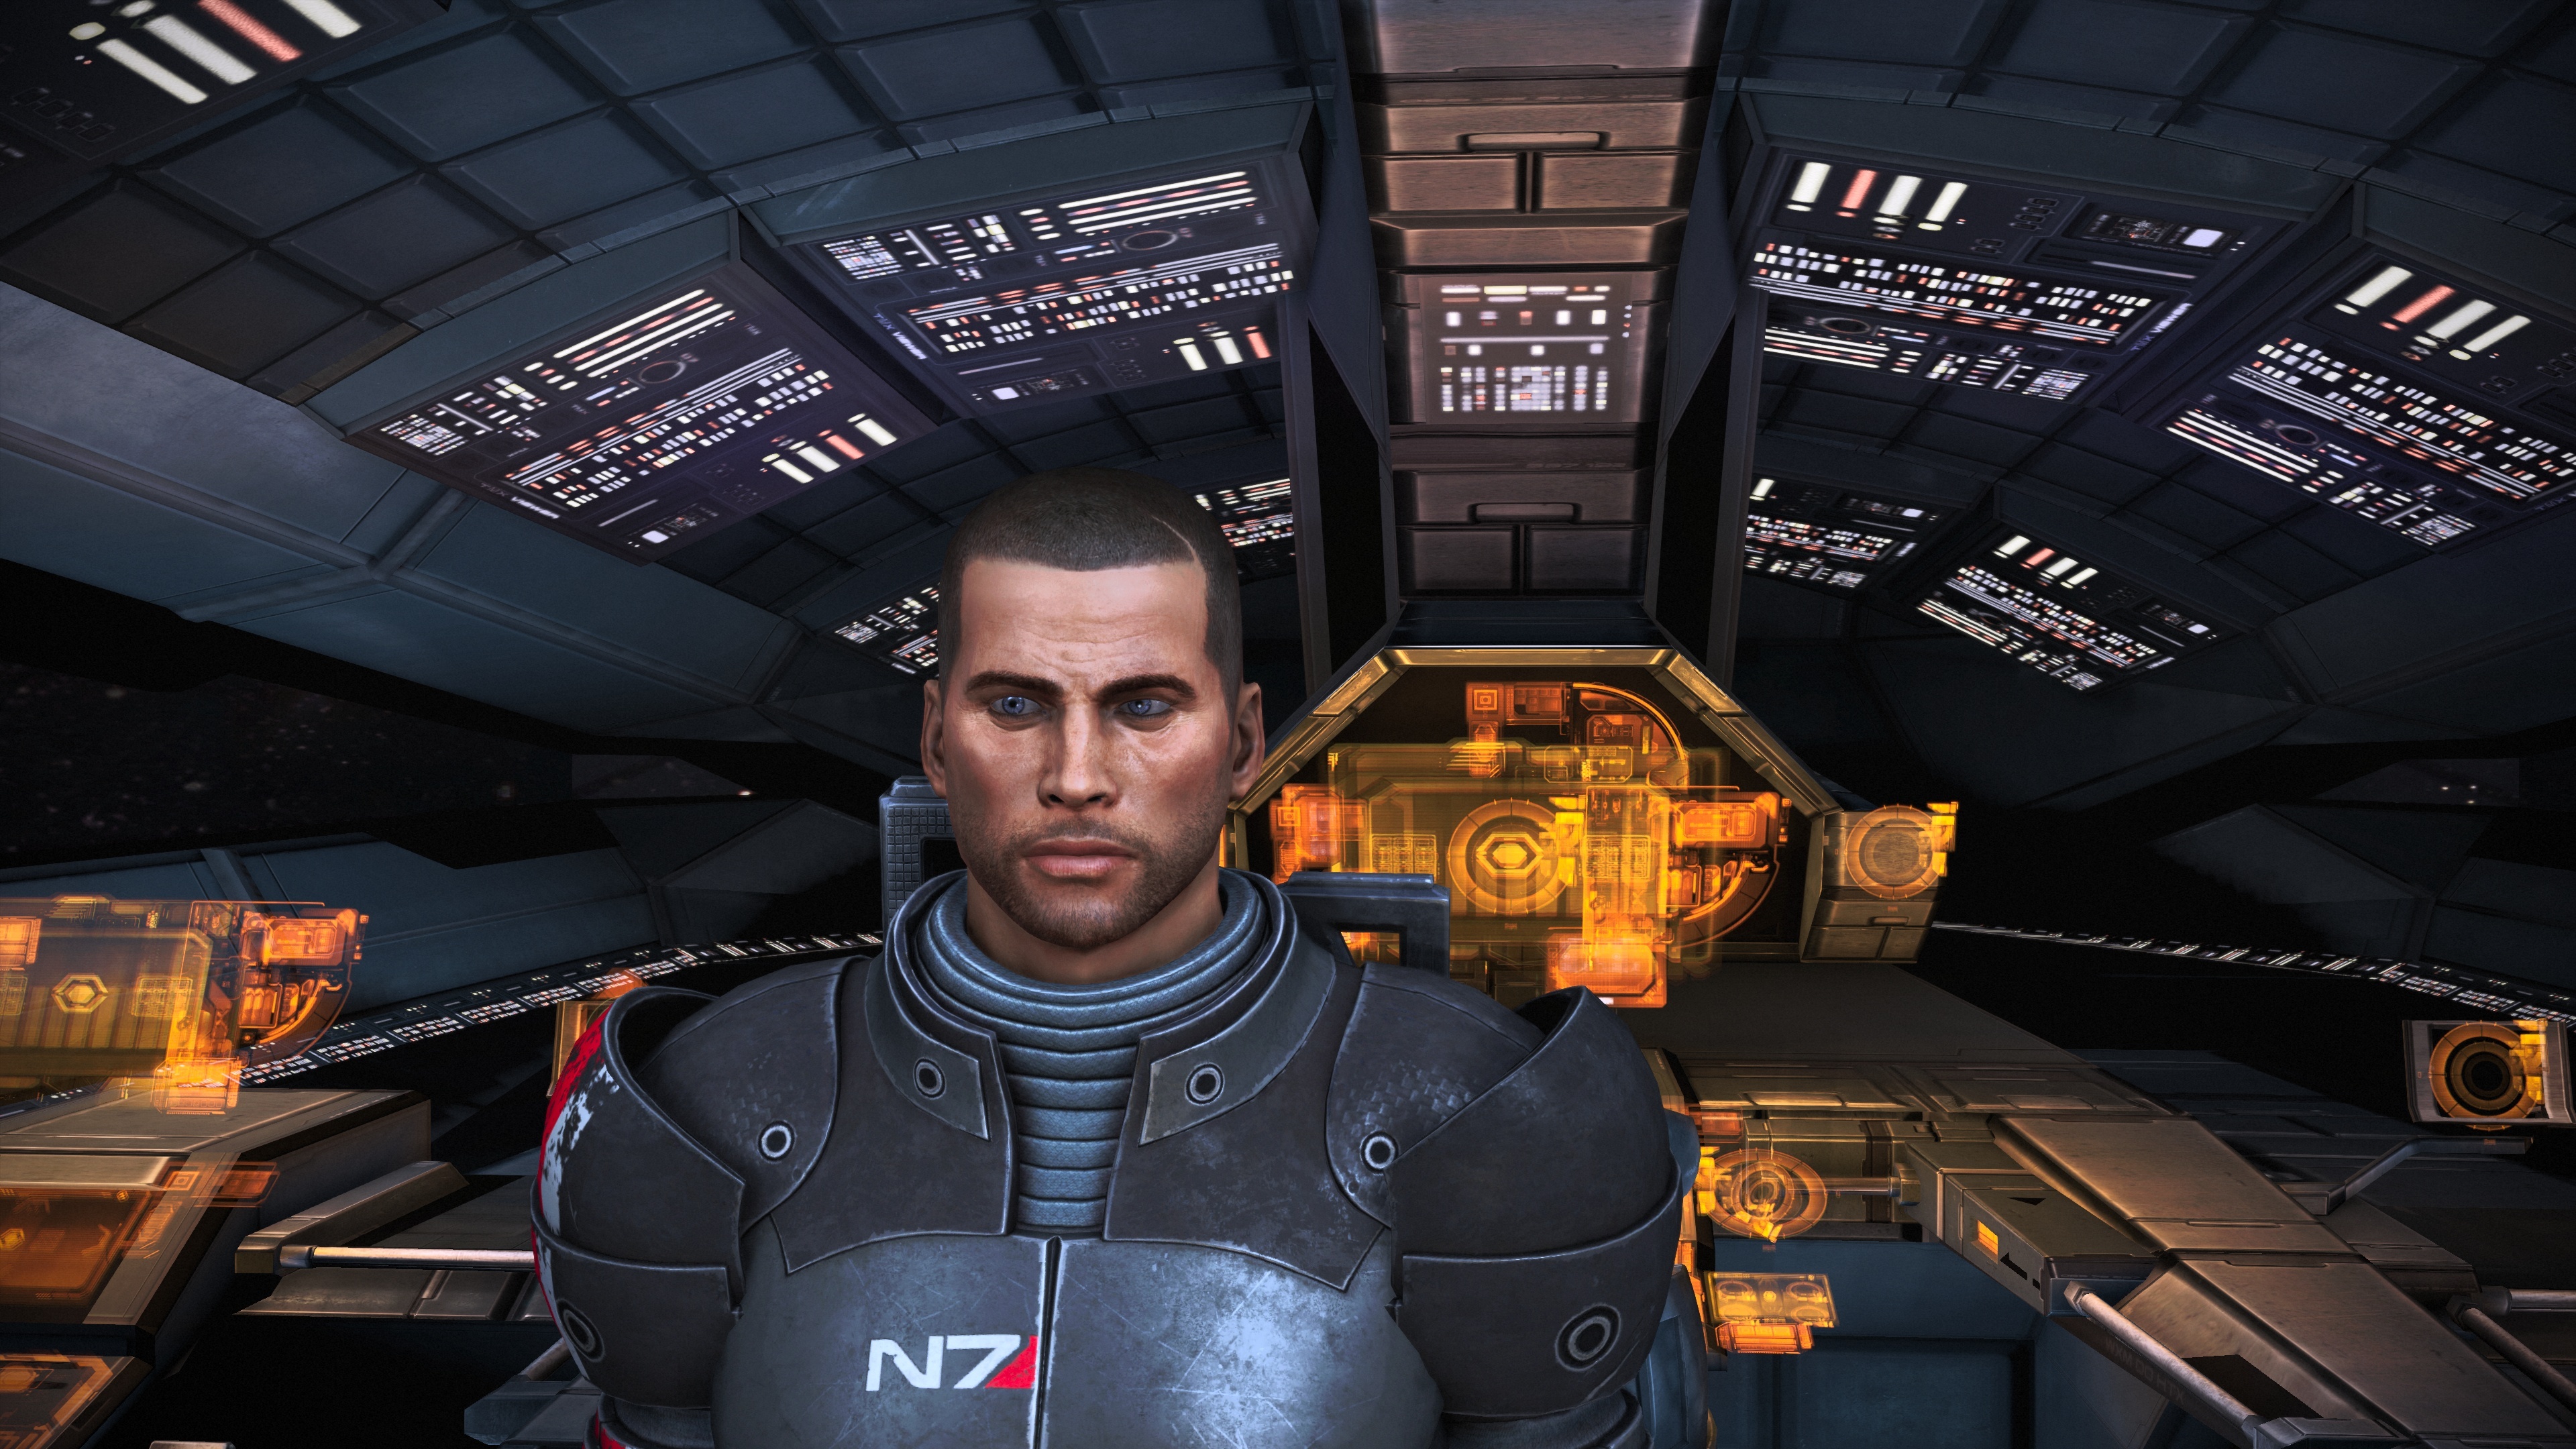 Mass Effect, Late night session, Le impressions, Gaming, 3840x2160 4K Desktop